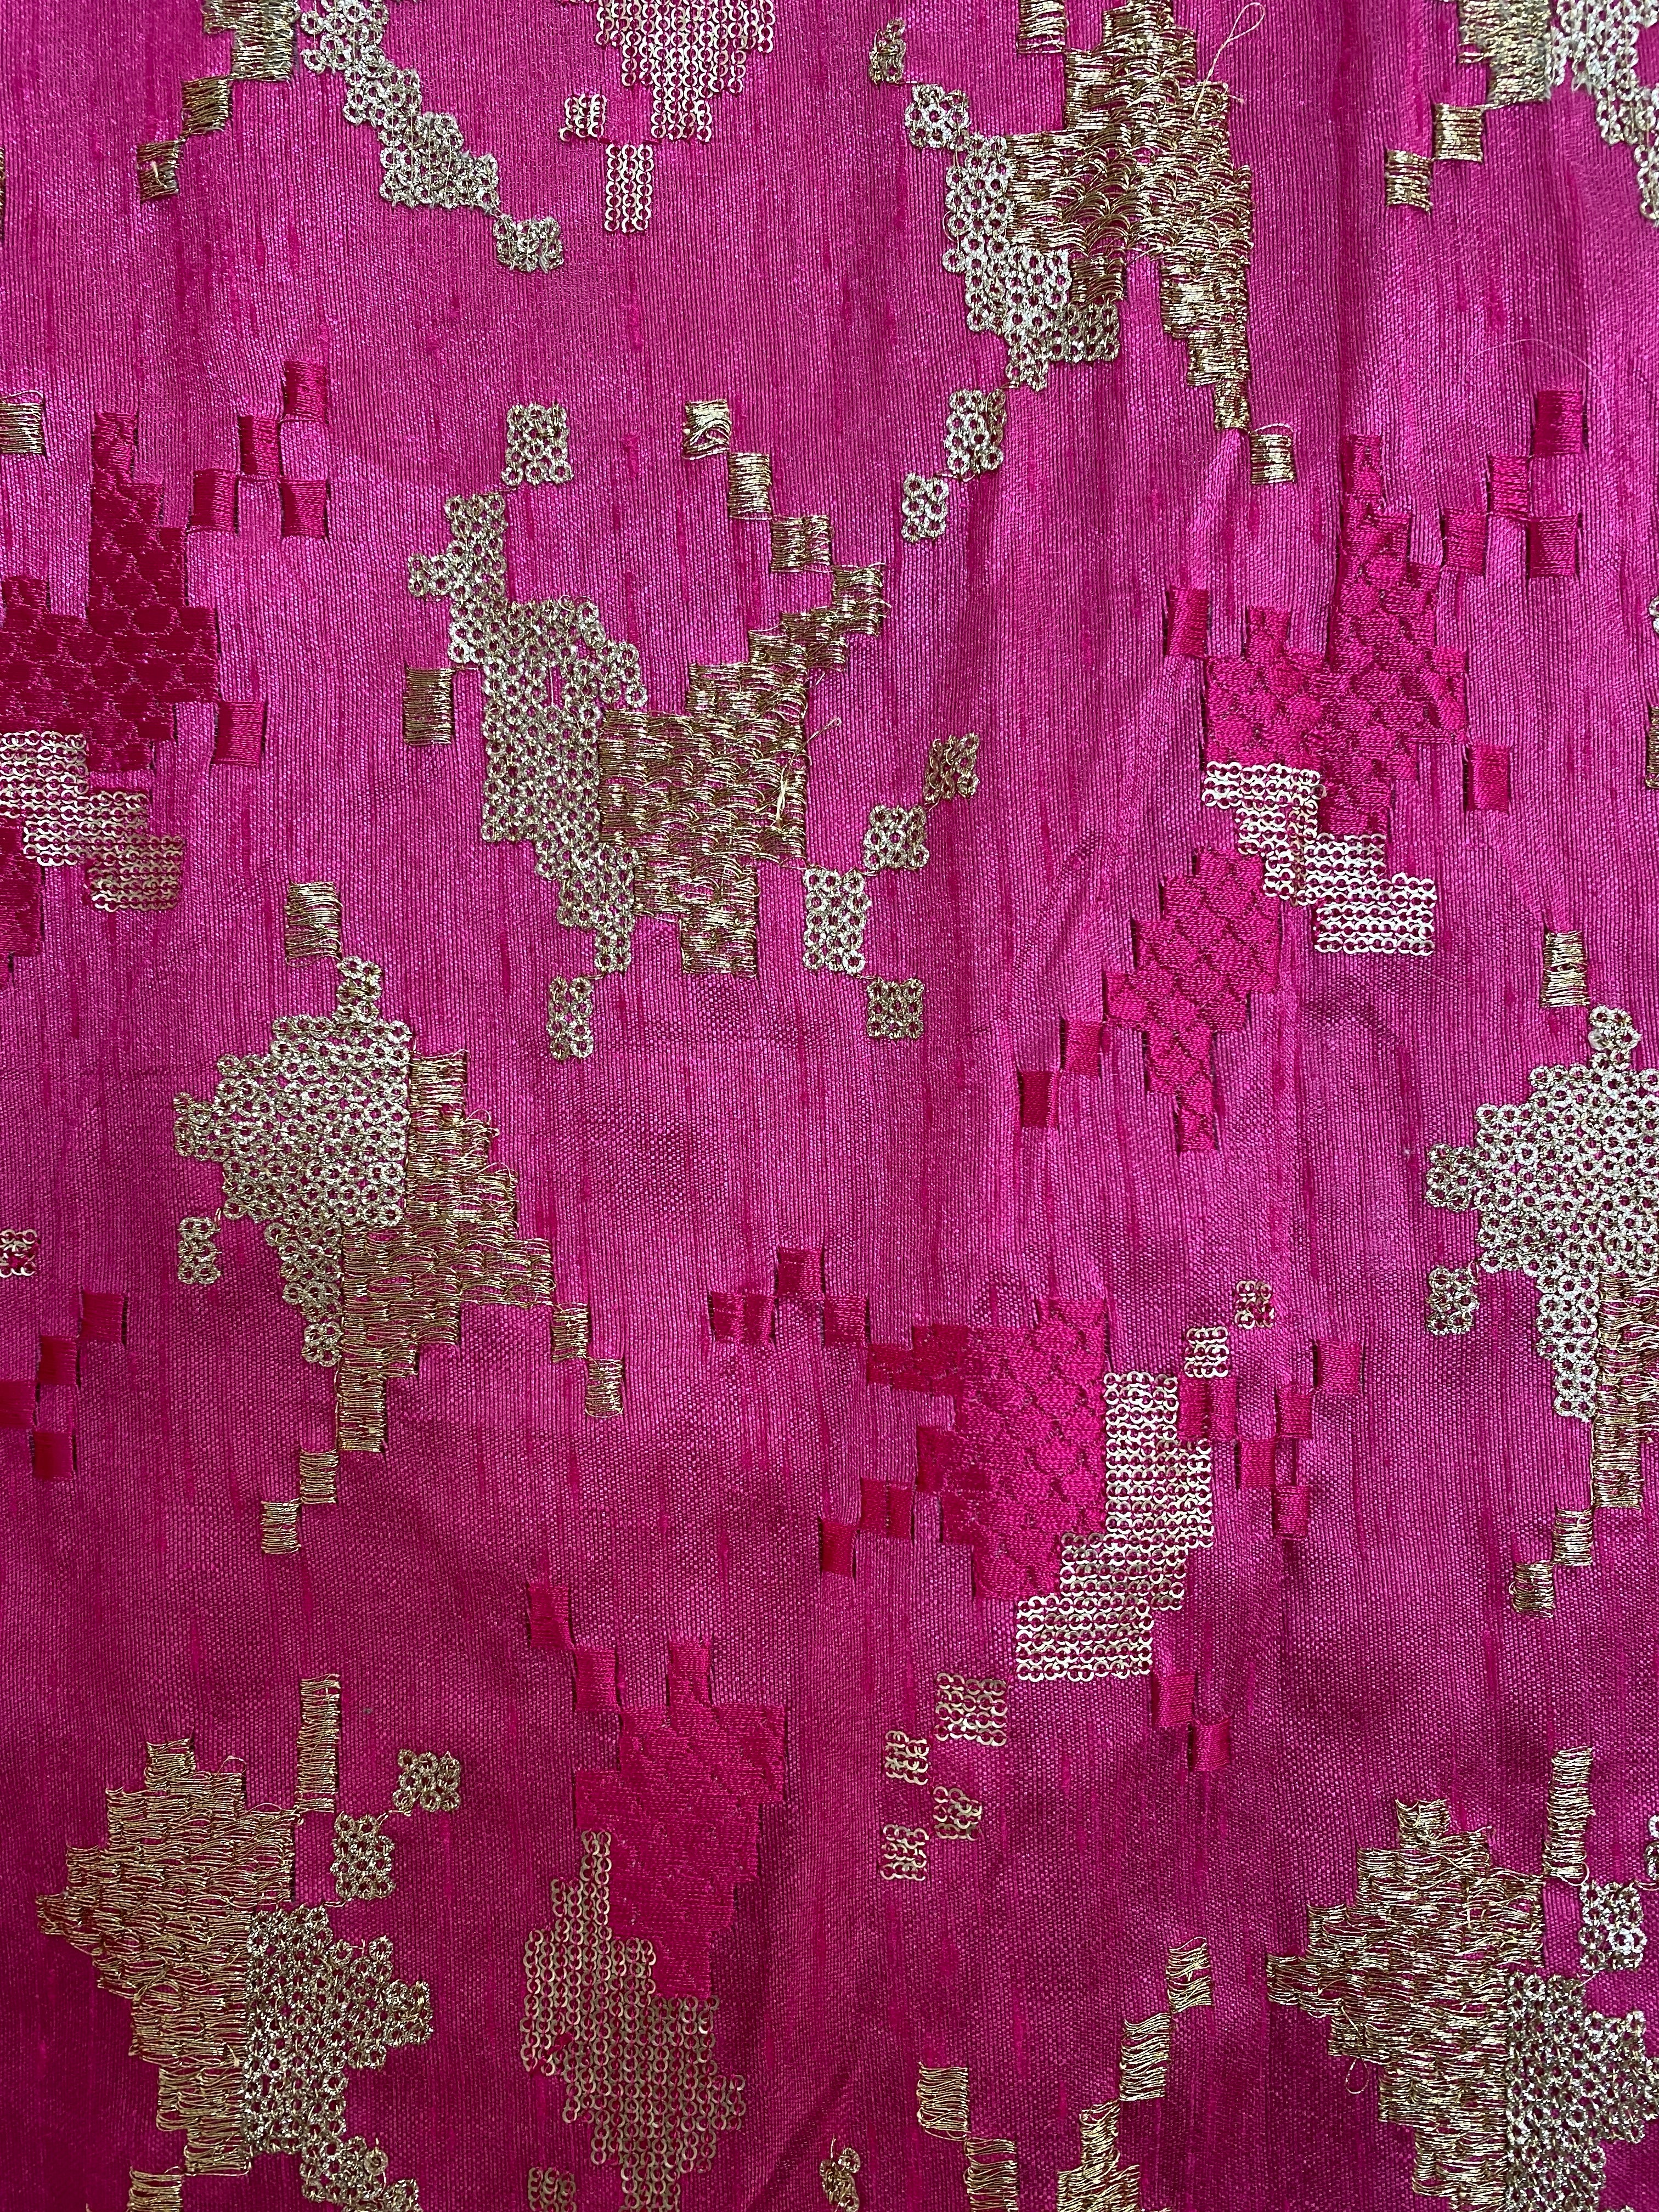 Lego - Pink & Gold Embroidery